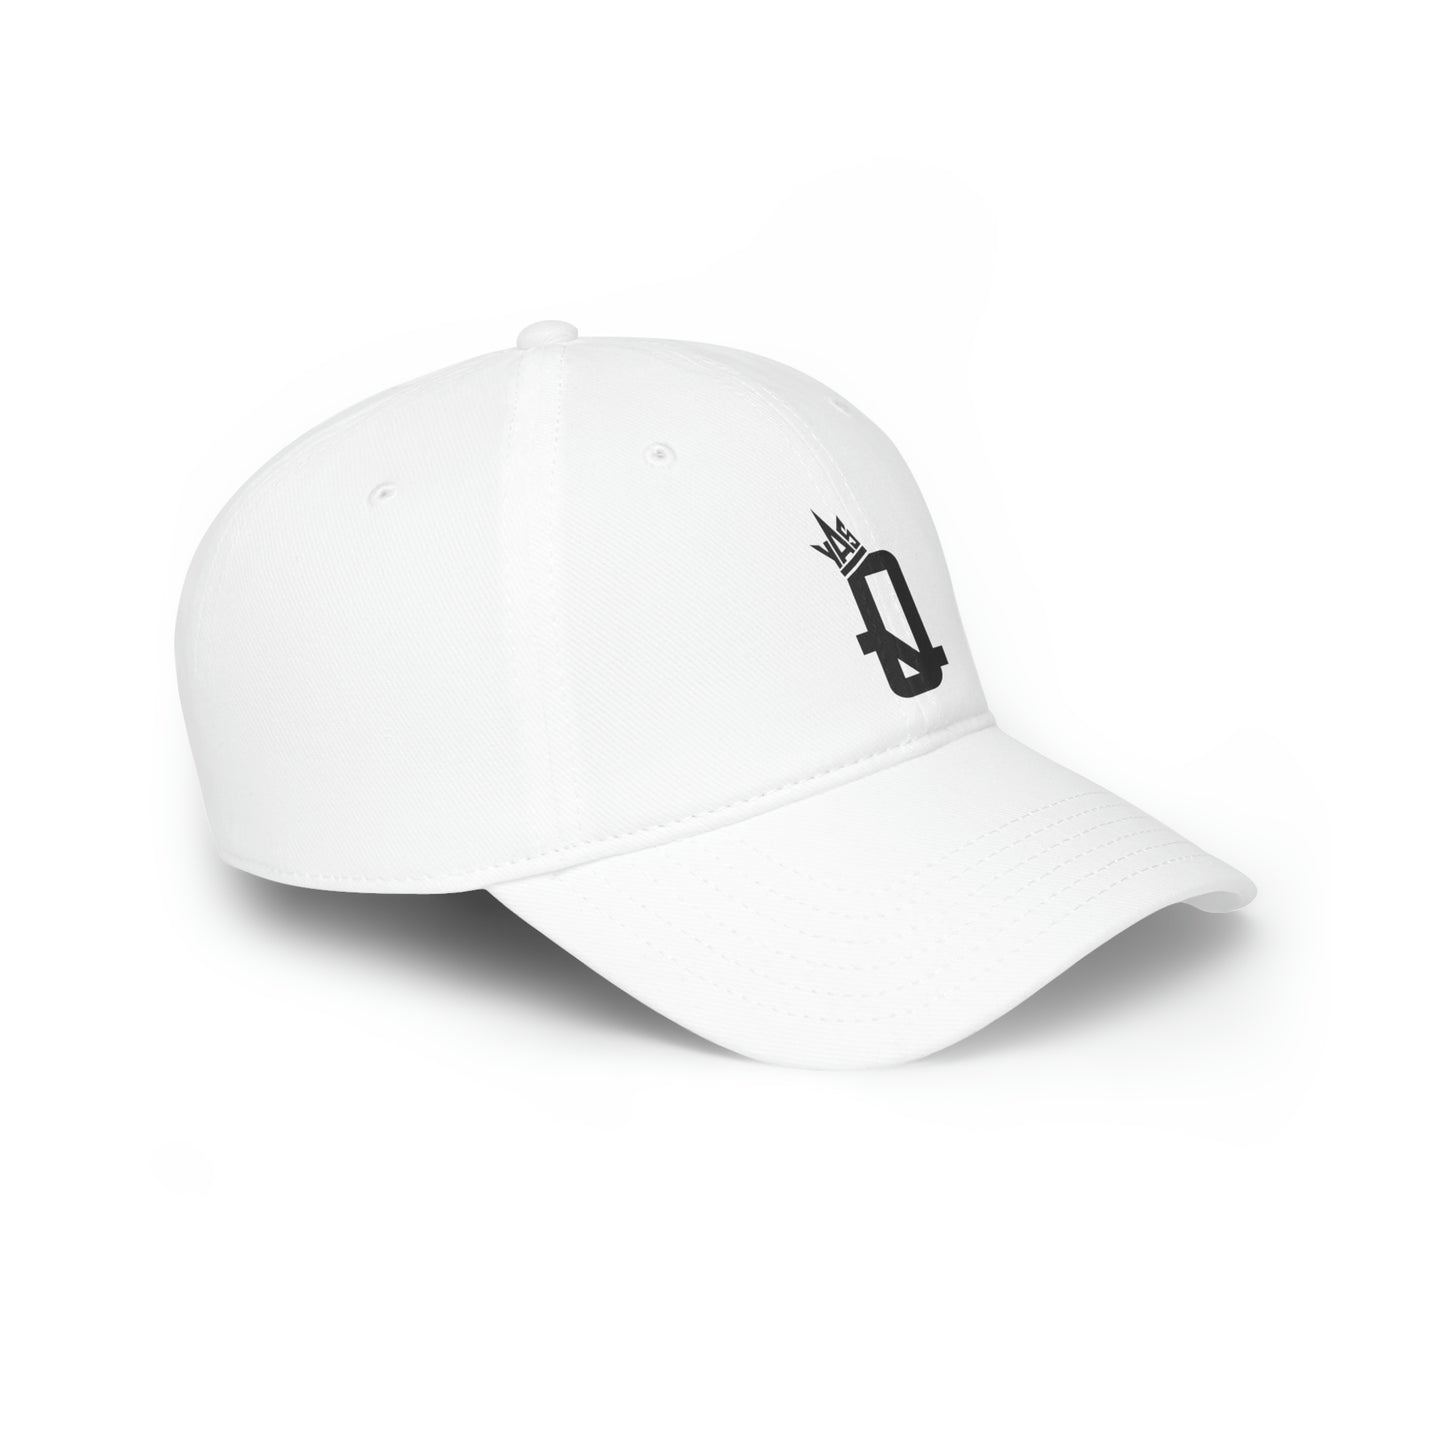 Crown Your Success: YAS Q (You Aspire Success Queen) Baseball Cap Collection - Reign in Style with Confidence!